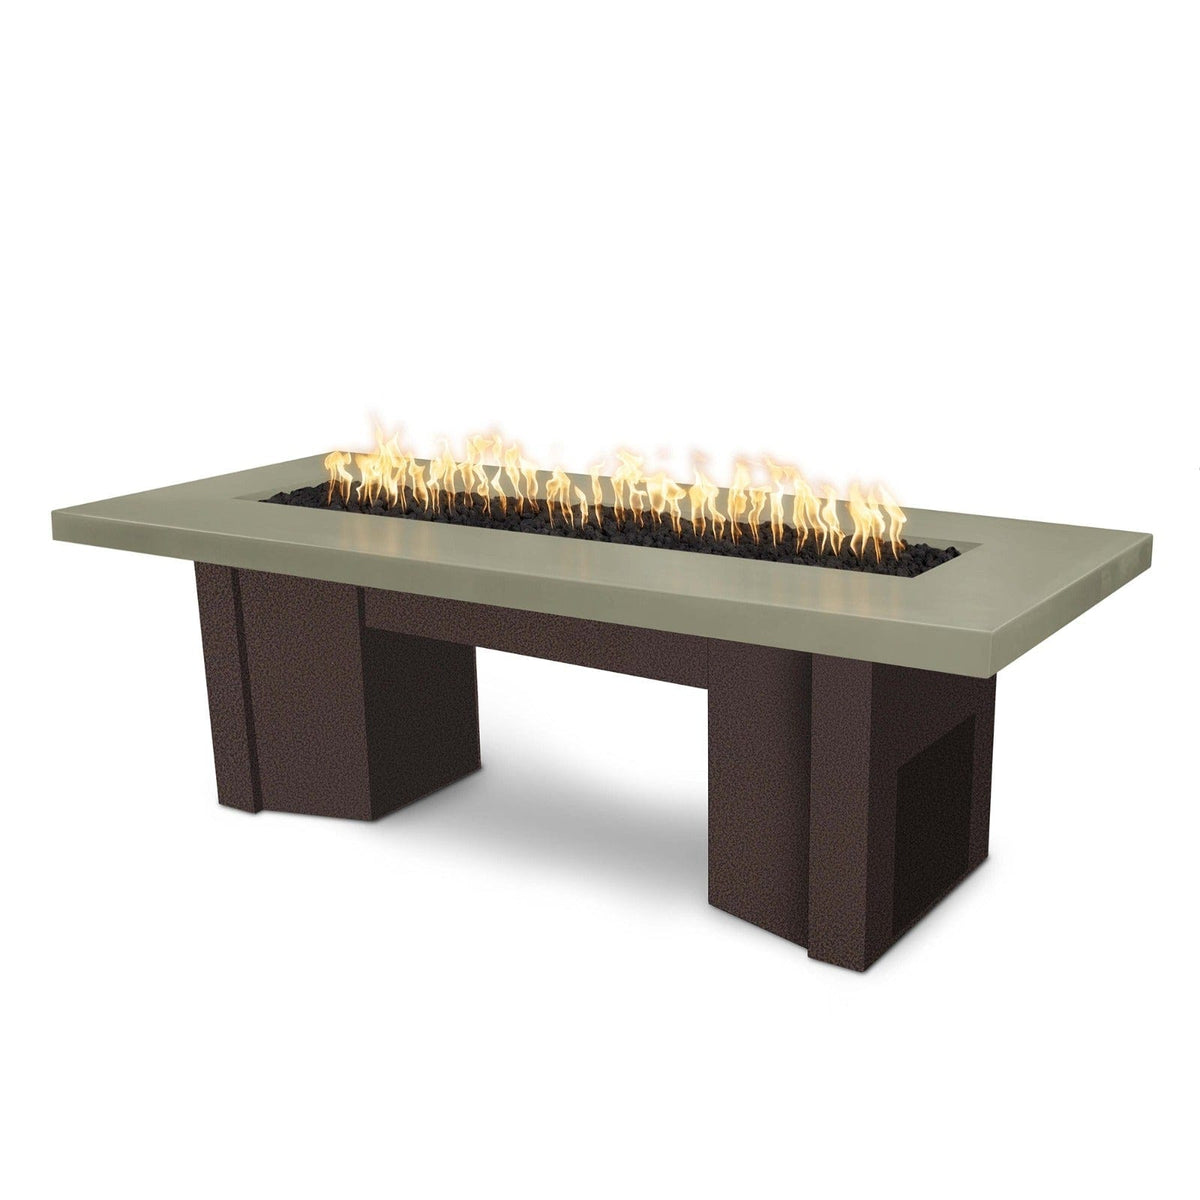 The Outdoor Plus Fire Features Ash (-ASH) / Copper Vein Powder Coated Steel (-CPV) The Outdoor Plus 60&quot; Alameda Fire Table Smooth Concrete in Natural Gas - Flame Sense System with Push Button Spark Igniter / OPT-ALMGFRC60FSEN-NG